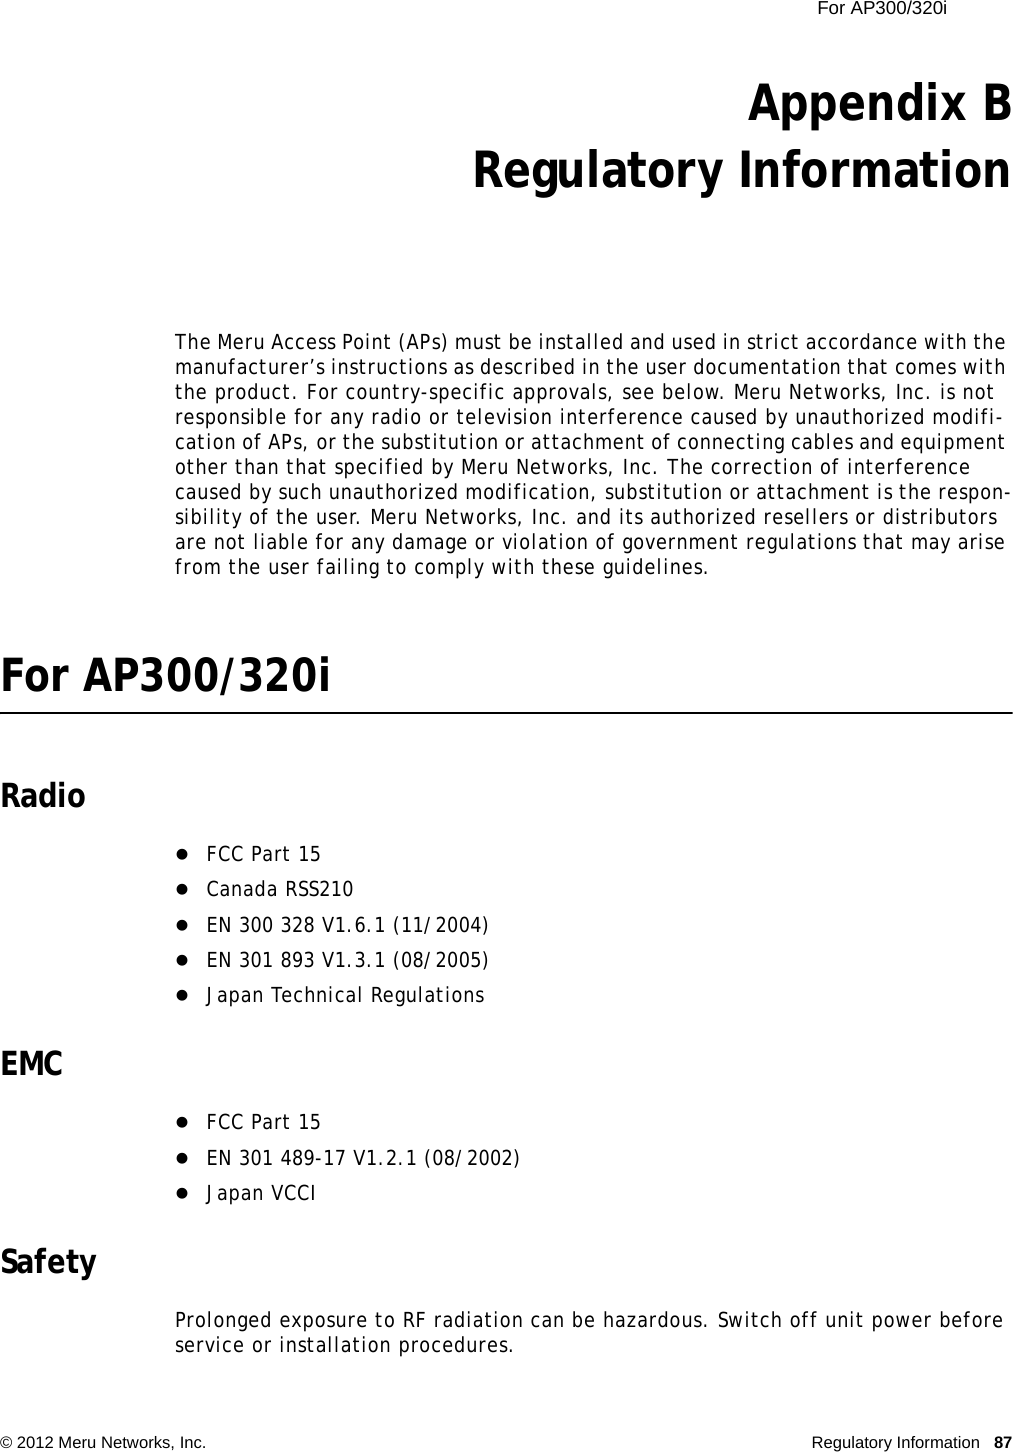  For AP300/320i © 2012 Meru Networks, Inc. Regulatory Information 87Appendix BRegulatory InformationThe Meru Access Point (APs) must be installed and used in strict accordance with the manufacturer’s instructions as described in the user documentation that comes with the product. For country-specific approvals, see below. Meru Networks, Inc. is not responsible for any radio or television interference caused by unauthorized modifi-cation of APs, or the substitution or attachment of connecting cables and equipment other than that specified by Meru Networks, Inc. The correction of interference caused by such unauthorized modification, substitution or attachment is the respon-sibility of the user. Meru Networks, Inc. and its authorized resellers or distributors are not liable for any damage or violation of government regulations that may arise from the user failing to comply with these guidelines.For AP300/320iRadioFCC Part 15Canada RSS210EN 300 328 V1.6.1 (11/2004)EN 301 893 V1.3.1 (08/2005)Japan Technical RegulationsEMCFCC Part 15EN 301 489-17 V1.2.1 (08/2002)Japan VCCISafetyProlonged exposure to RF radiation can be hazardous. Switch off unit power before service or installation procedures.